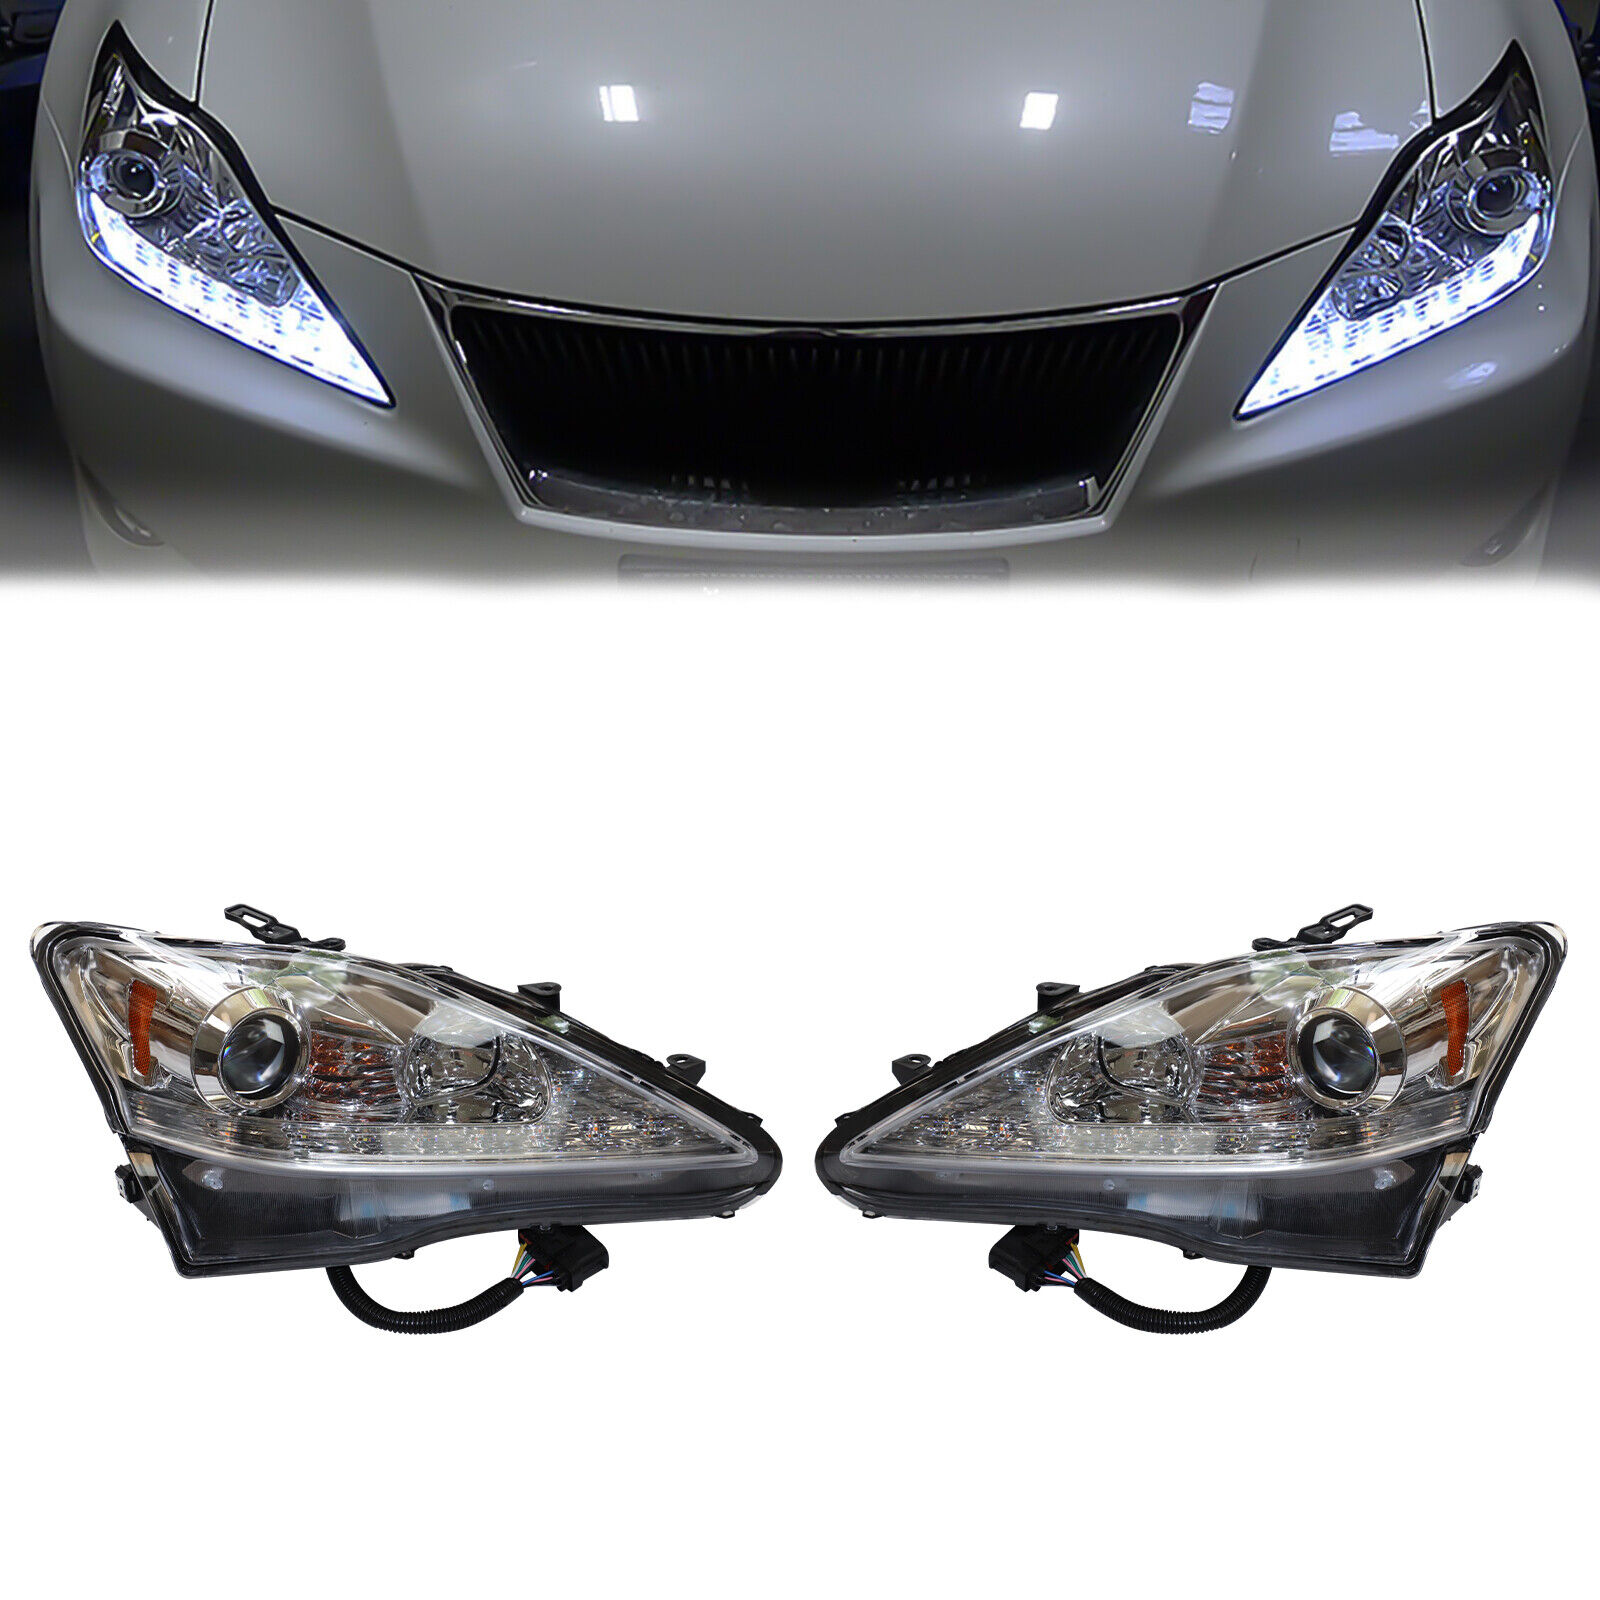 For 2006-2013 Lexus IS250 IS350 LED DRL Projector Headlights Chrome Left+Right